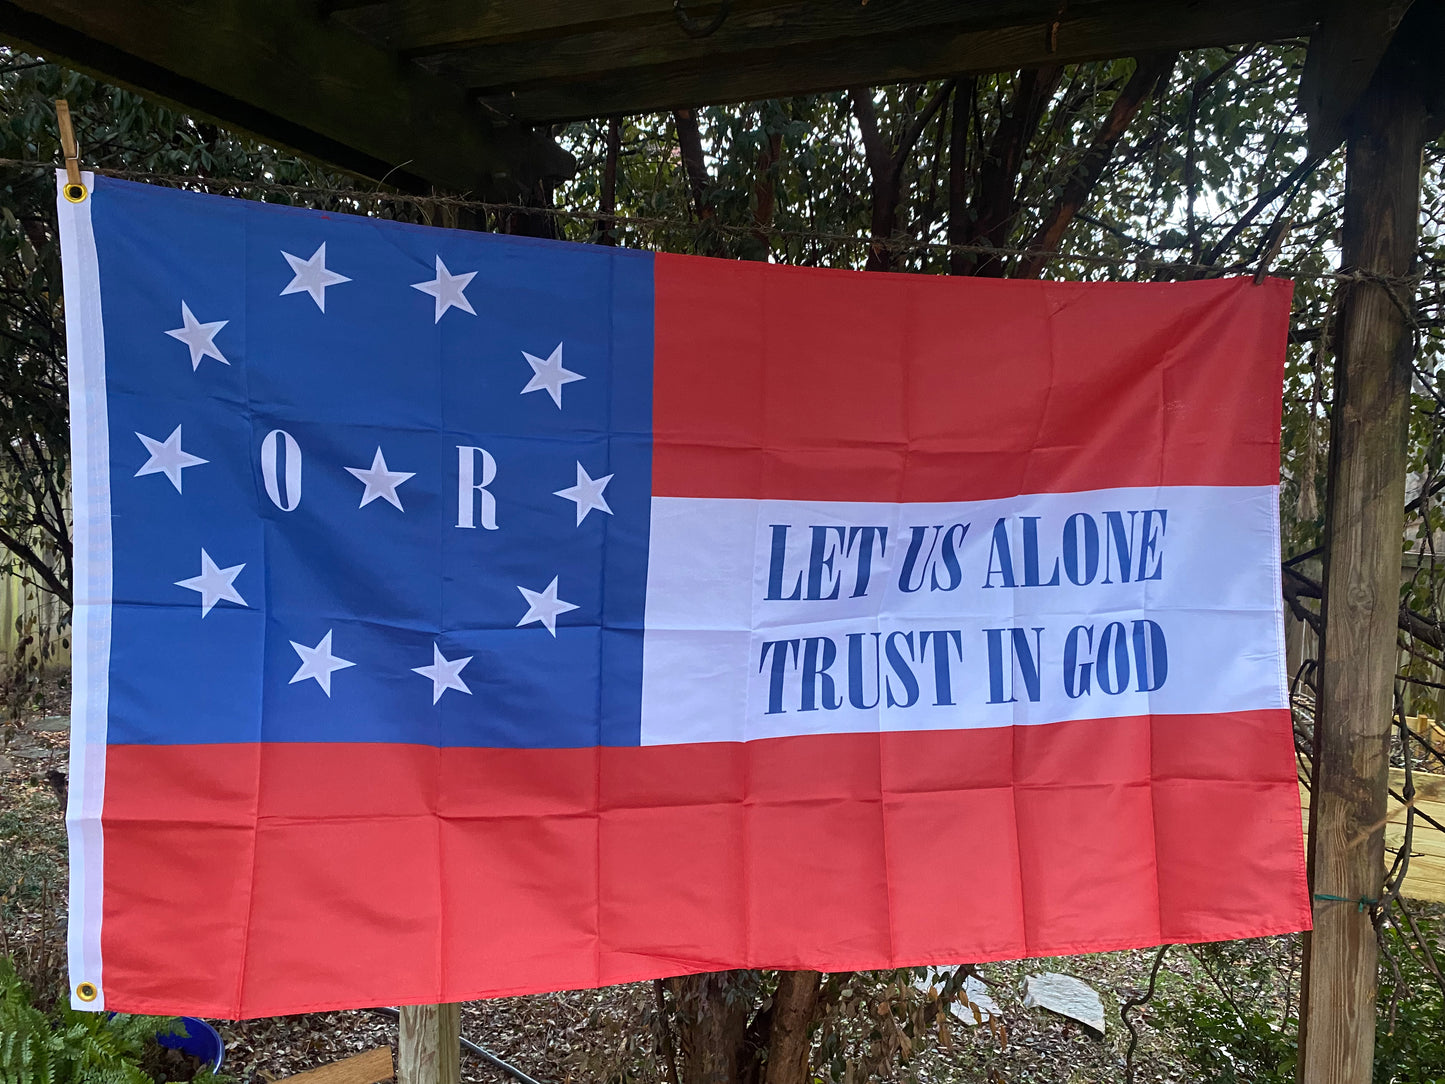 6th Louisiana Infantry "Let Us Alone" House Flag